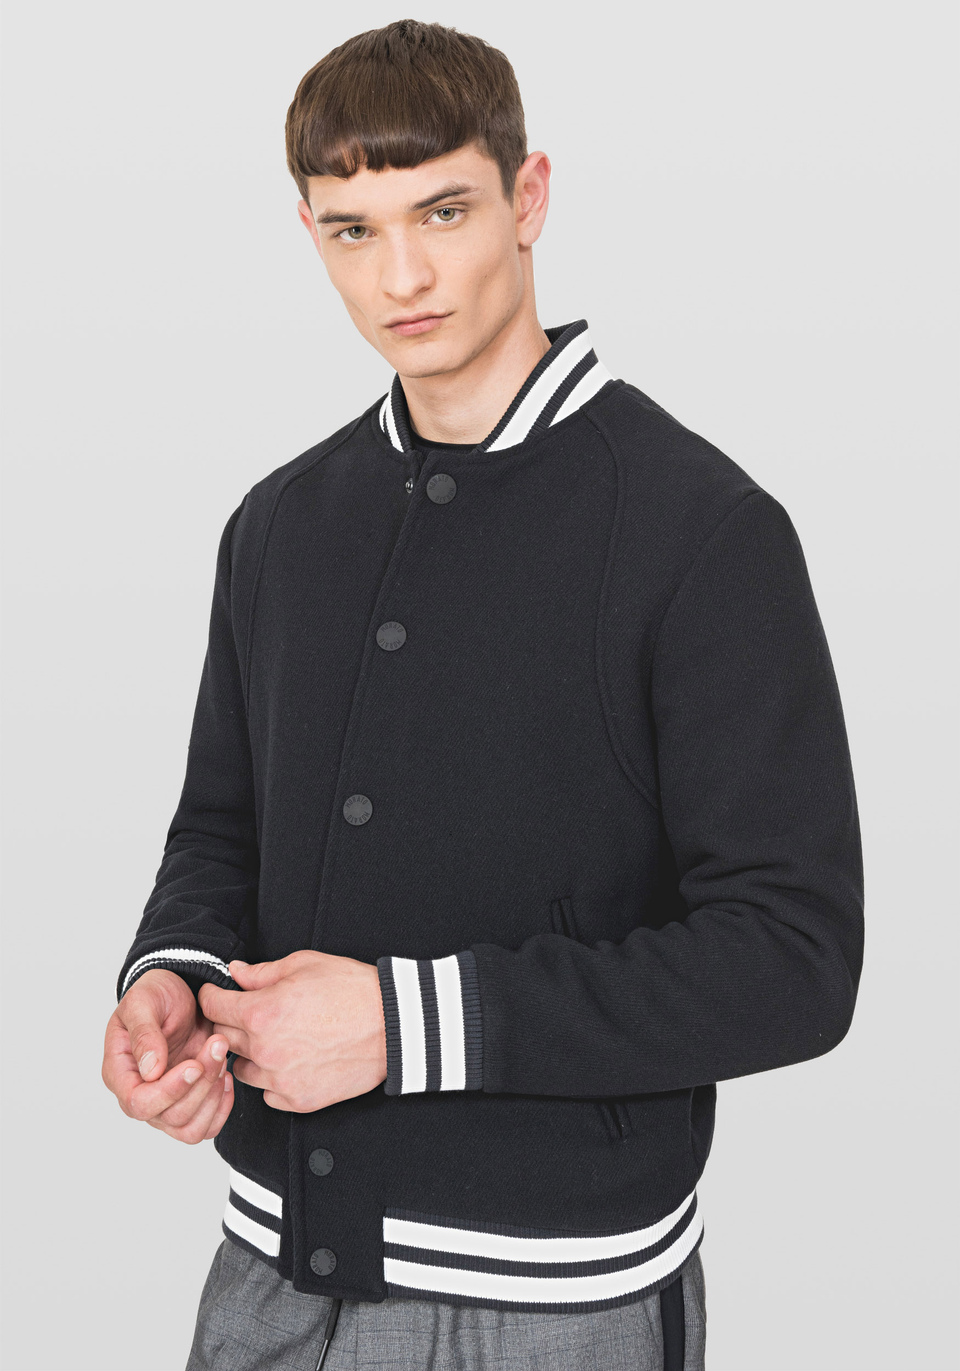 BOMBER JACKET WITH STRIPED RIBBING IN A WOOL BLEND - Antony Morato Online Shop